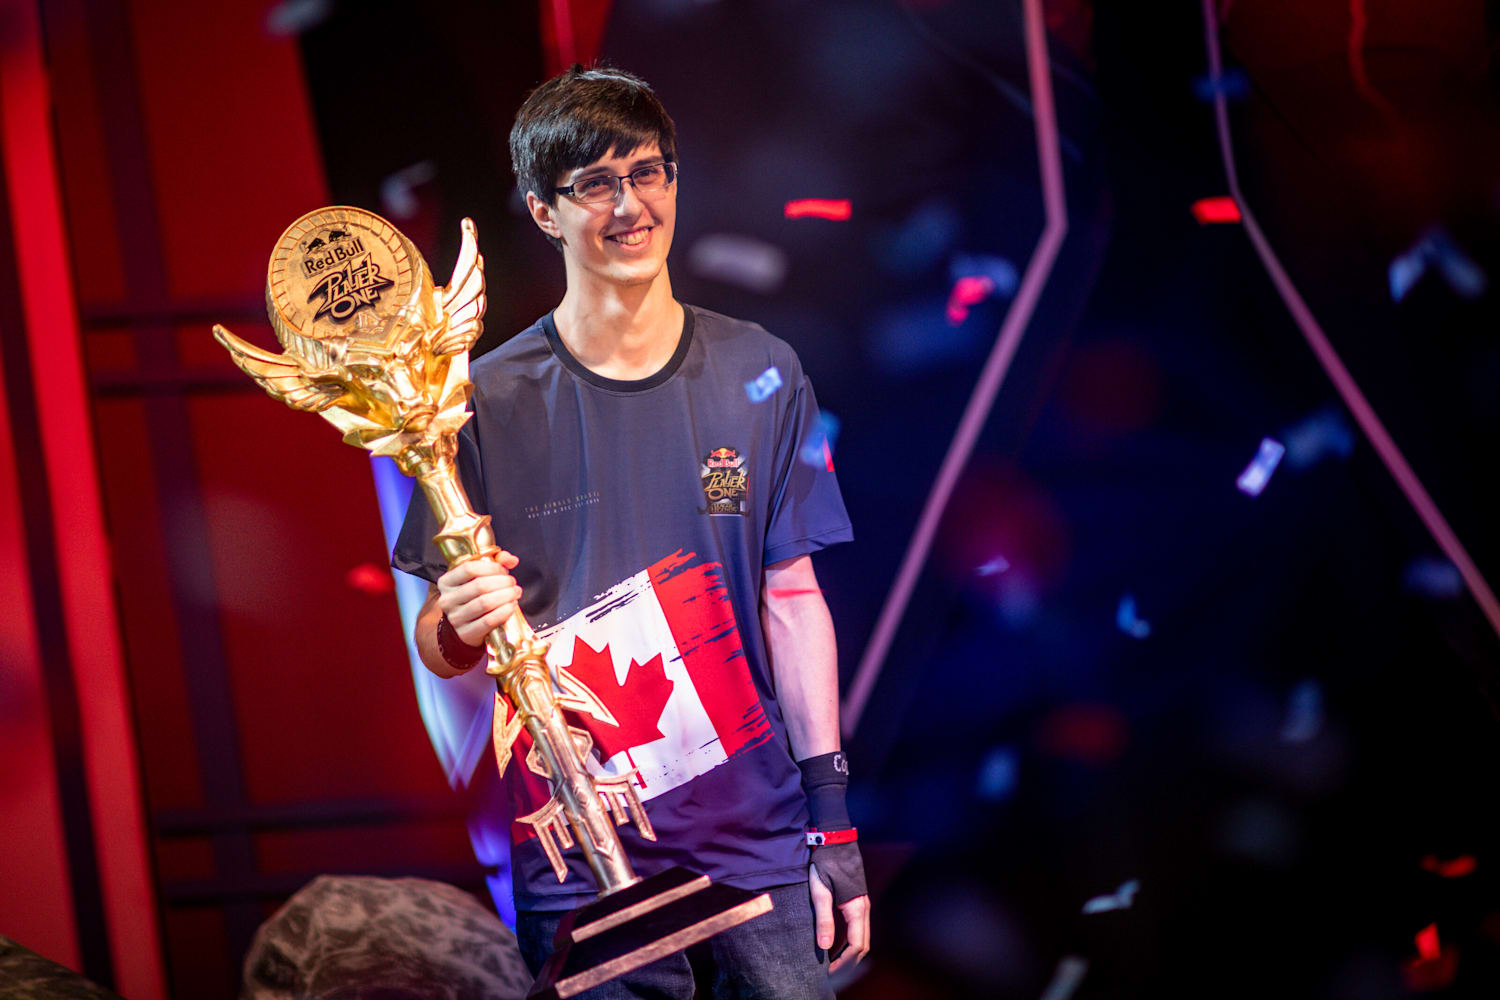 The Best LCS Champion Picks for Solo Queue